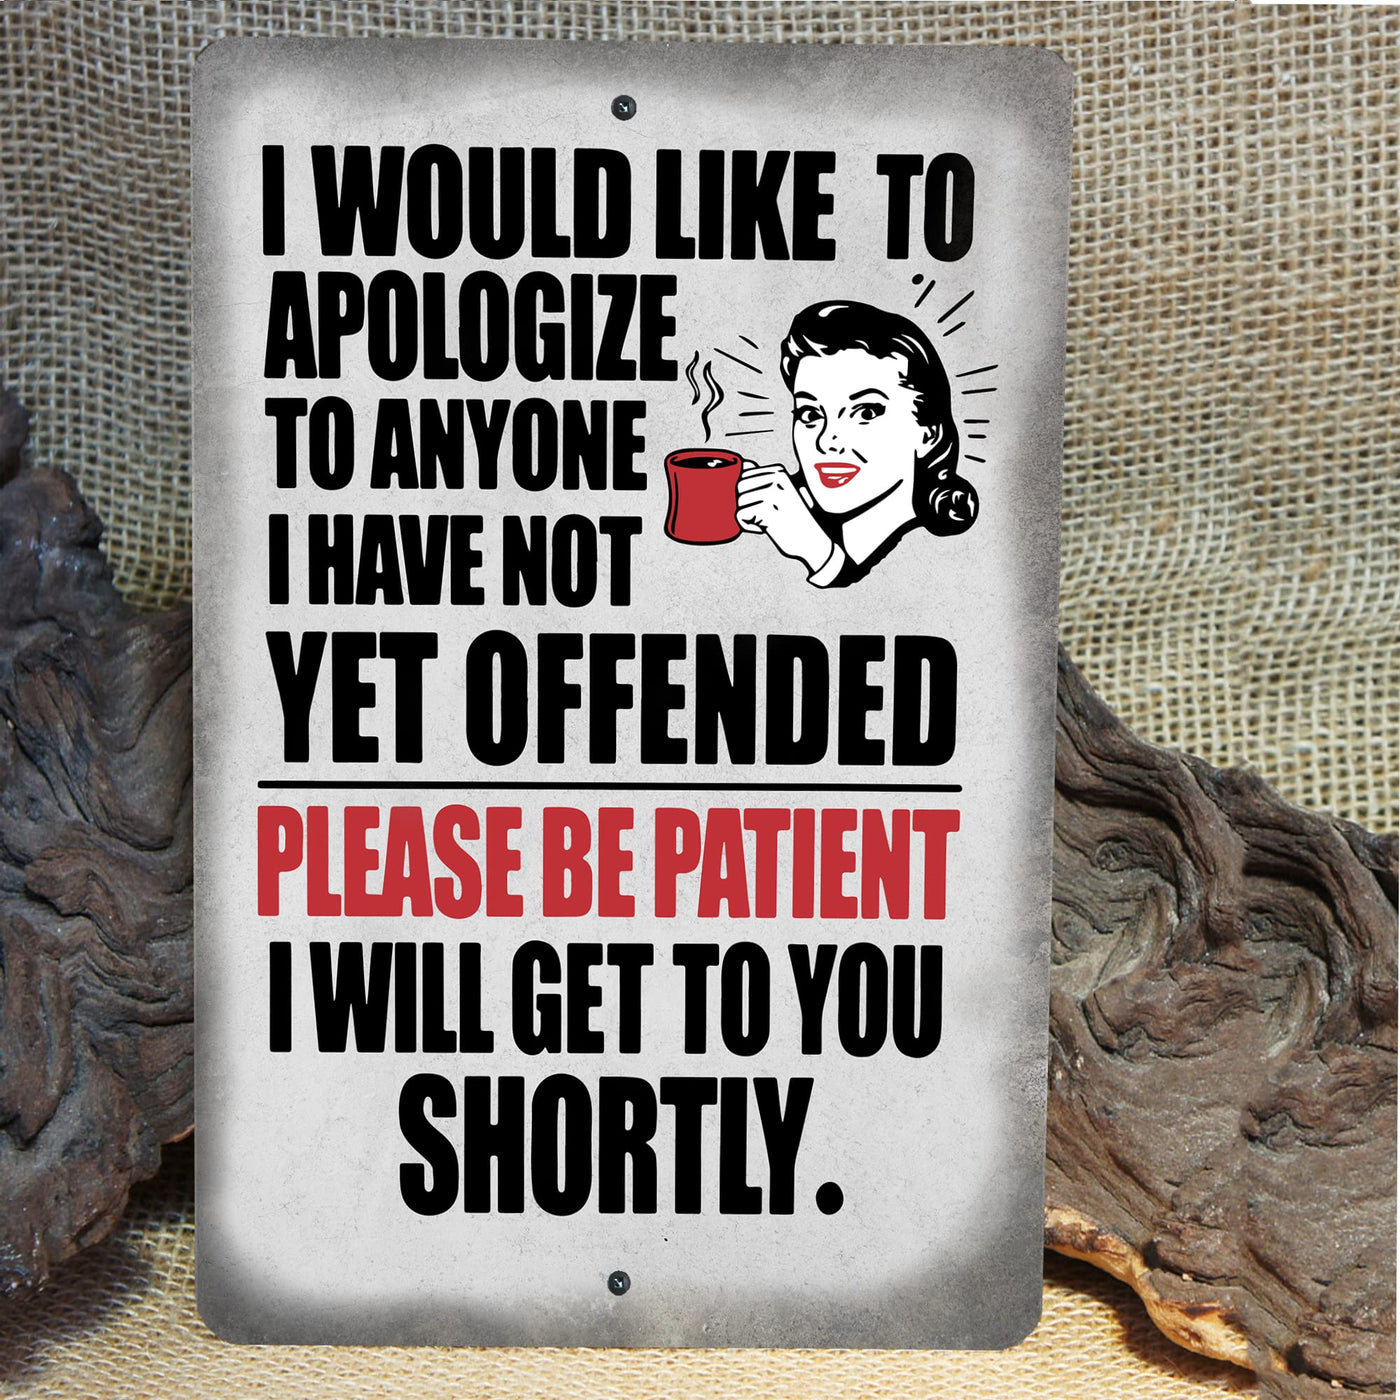 Please Be Patient- Get to You Shortly Metal Signs Vintage Wall Art -12x18" Funny Rustic Sign -Home-Kitchen-Patio Decor. Retro Tin Sign. Bar-Garage-Cave-Shop Decor & Fun Sarcastic Gifts! (X-Large)